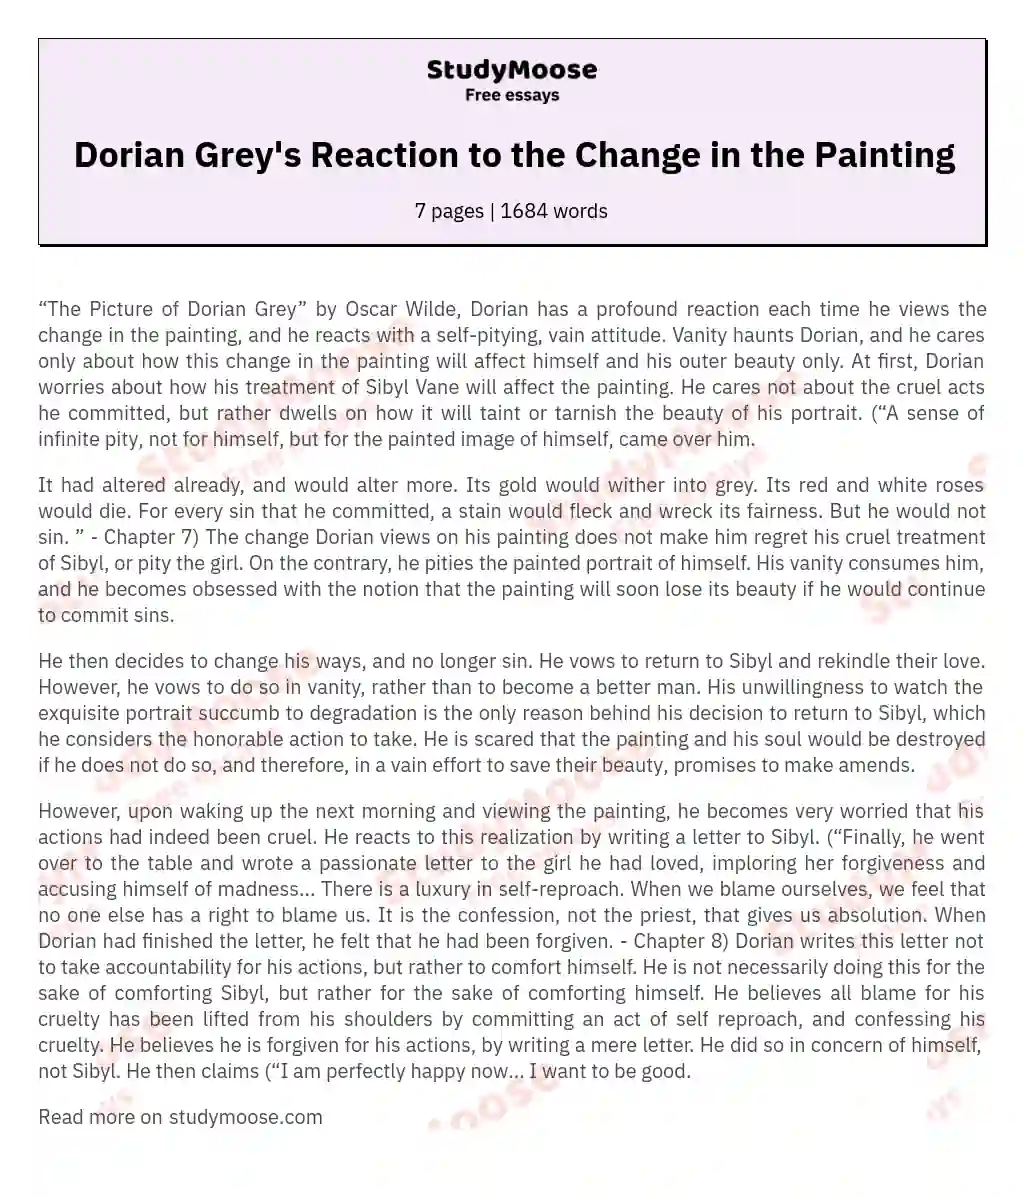 Dorian Grey's Reaction to the Change in the Painting essay